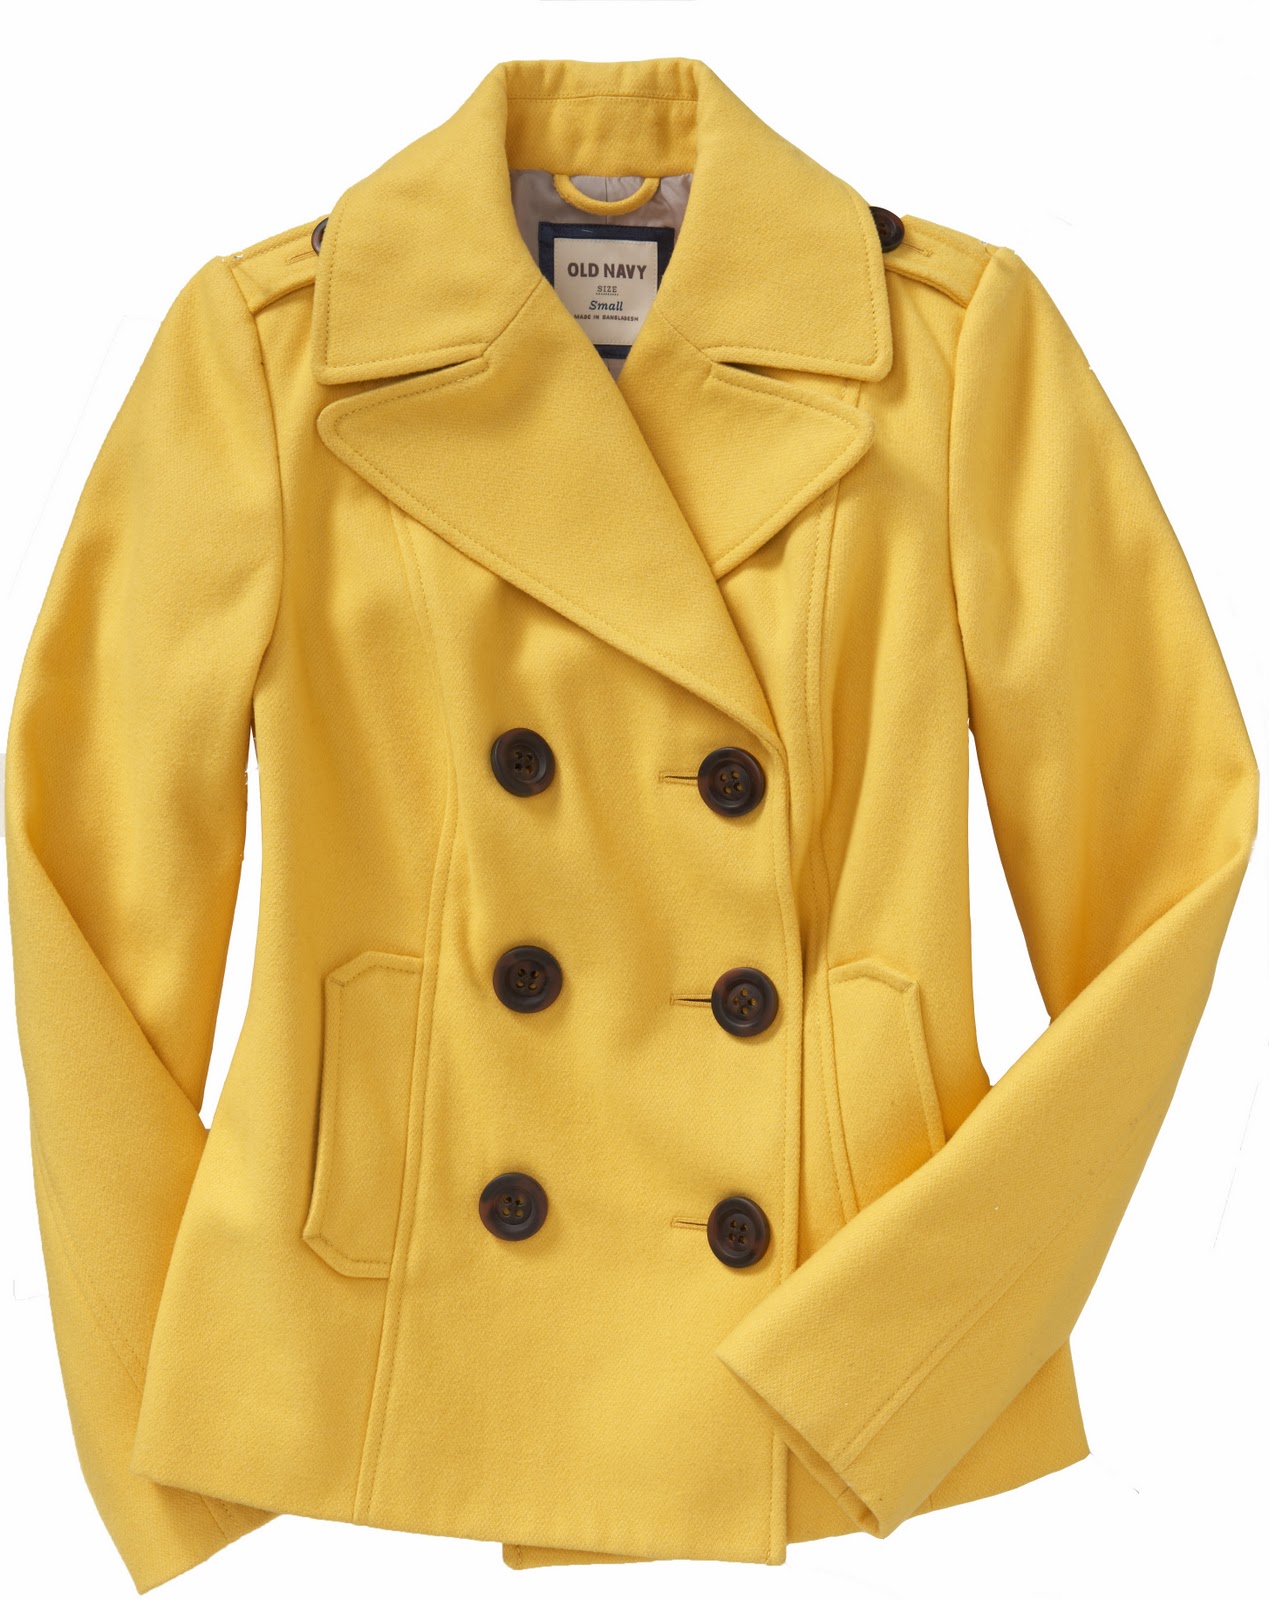 The Hip & Urban Girl's Guide: Old Navy F/W 2011 Outerwear Collection